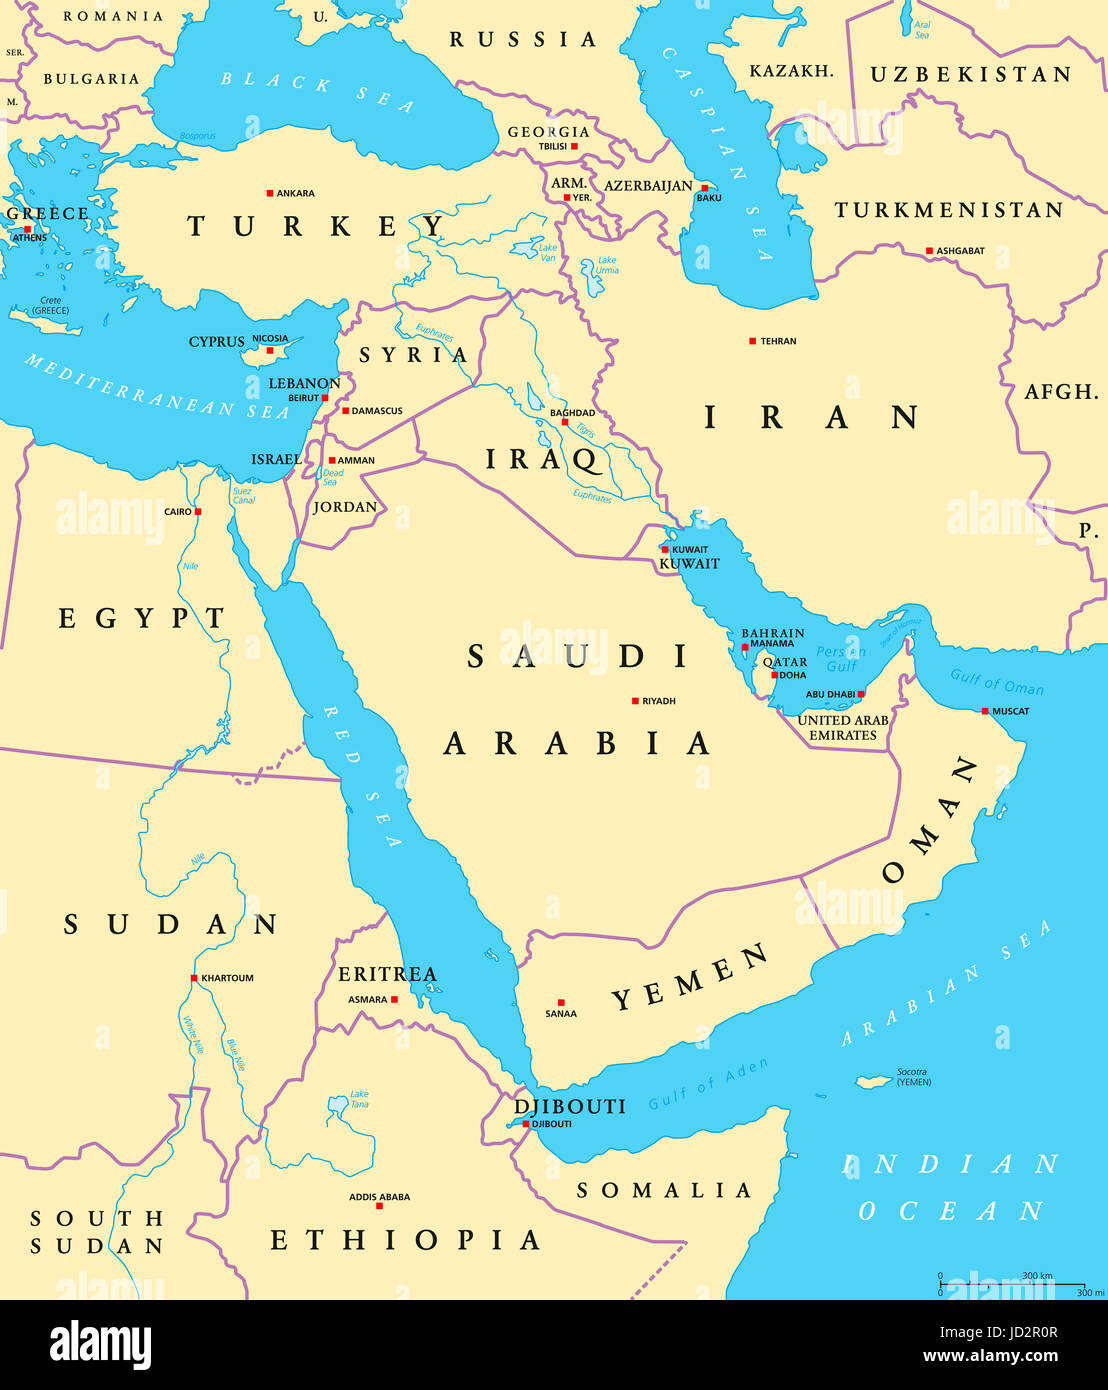 Map Of Asia And Middle East Countries 